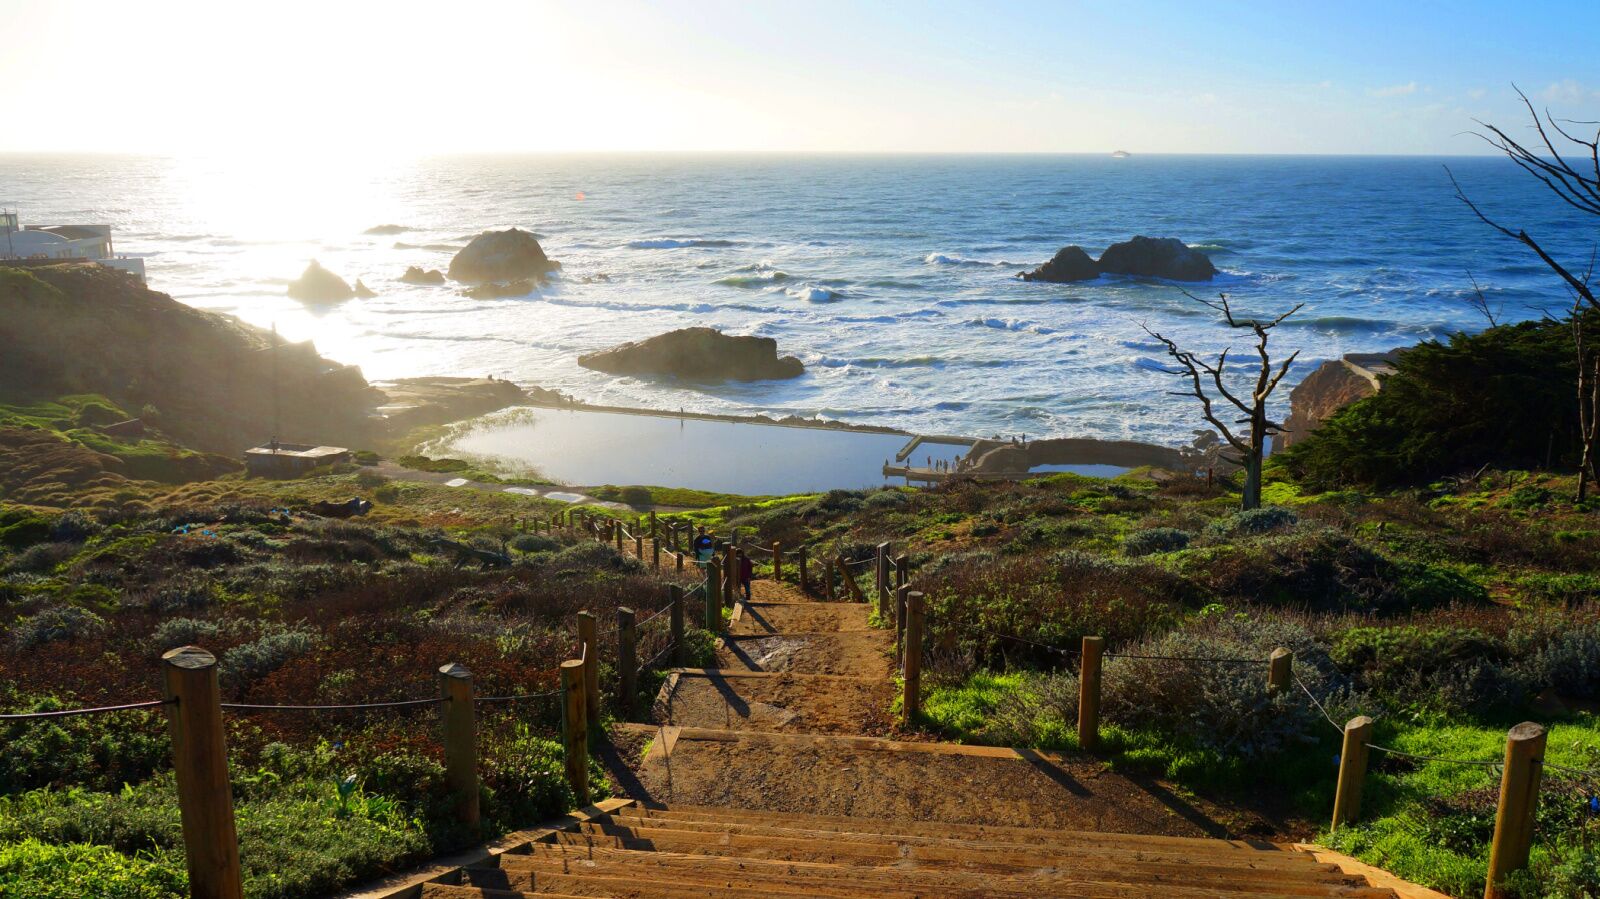 Lands End and sutro baths walkway - parks in san francisco